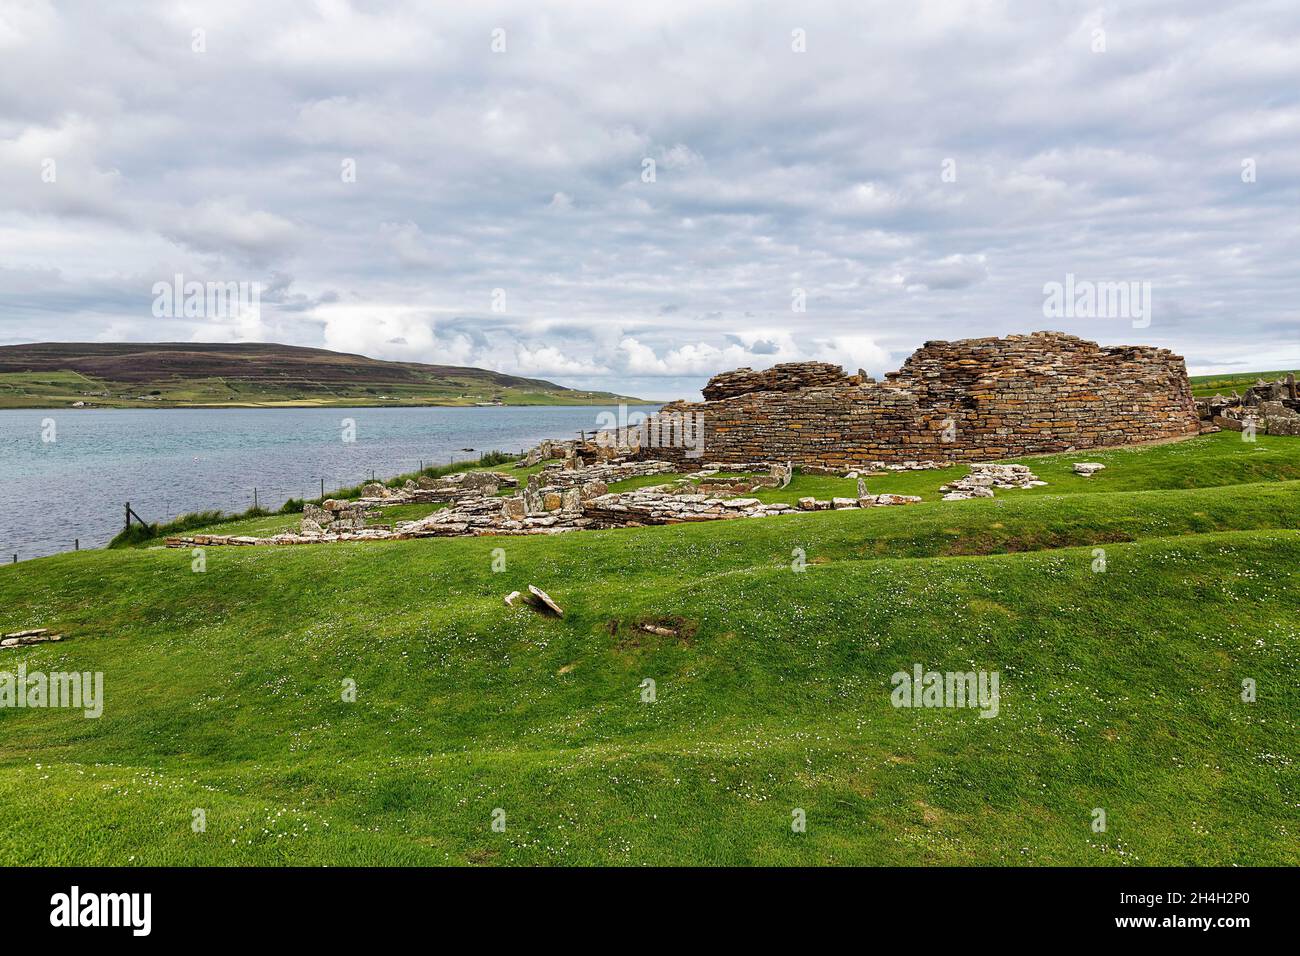 Ruins of an Iron Age settlement on the coast, Broch of Gurness, Tingwall, Mainland, Orkney Islands, Scotland, Great Britain Stock Photo